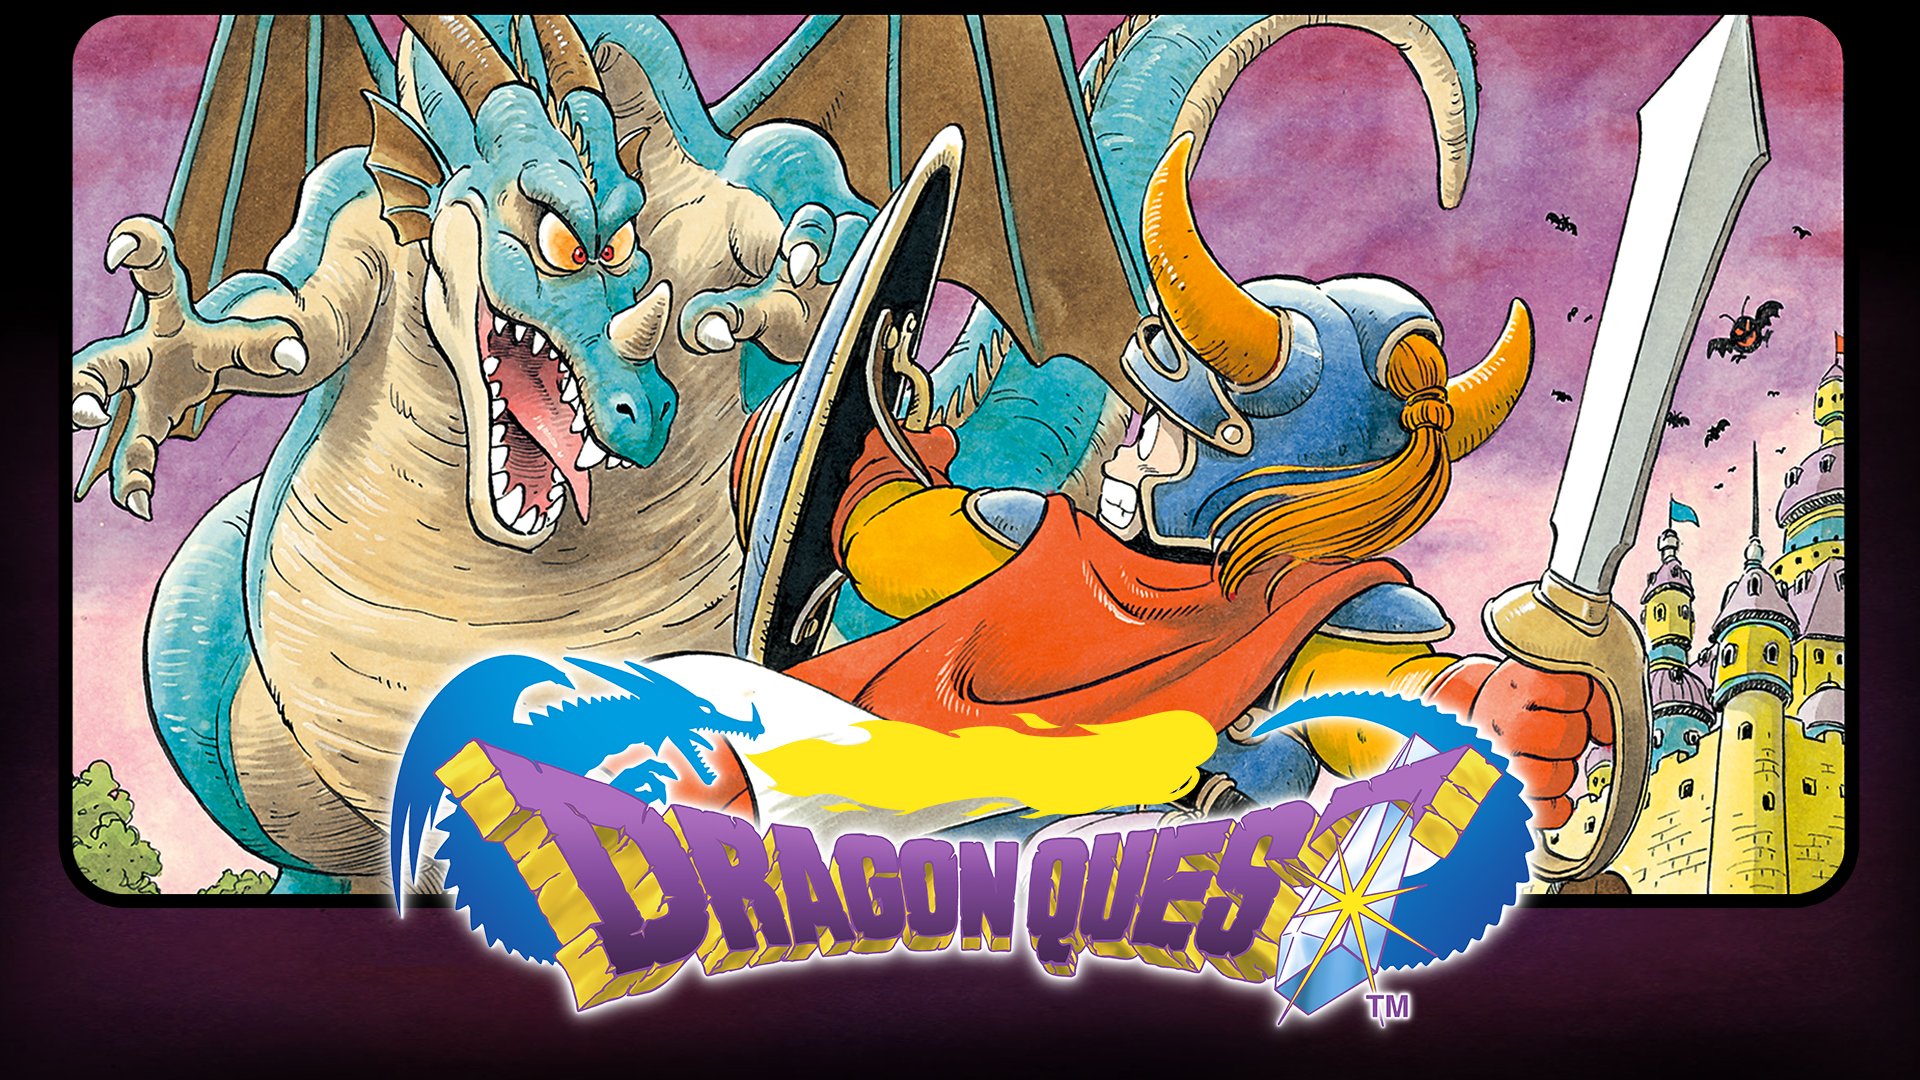 Legendary composer of Dragon Quest has passed away at 90